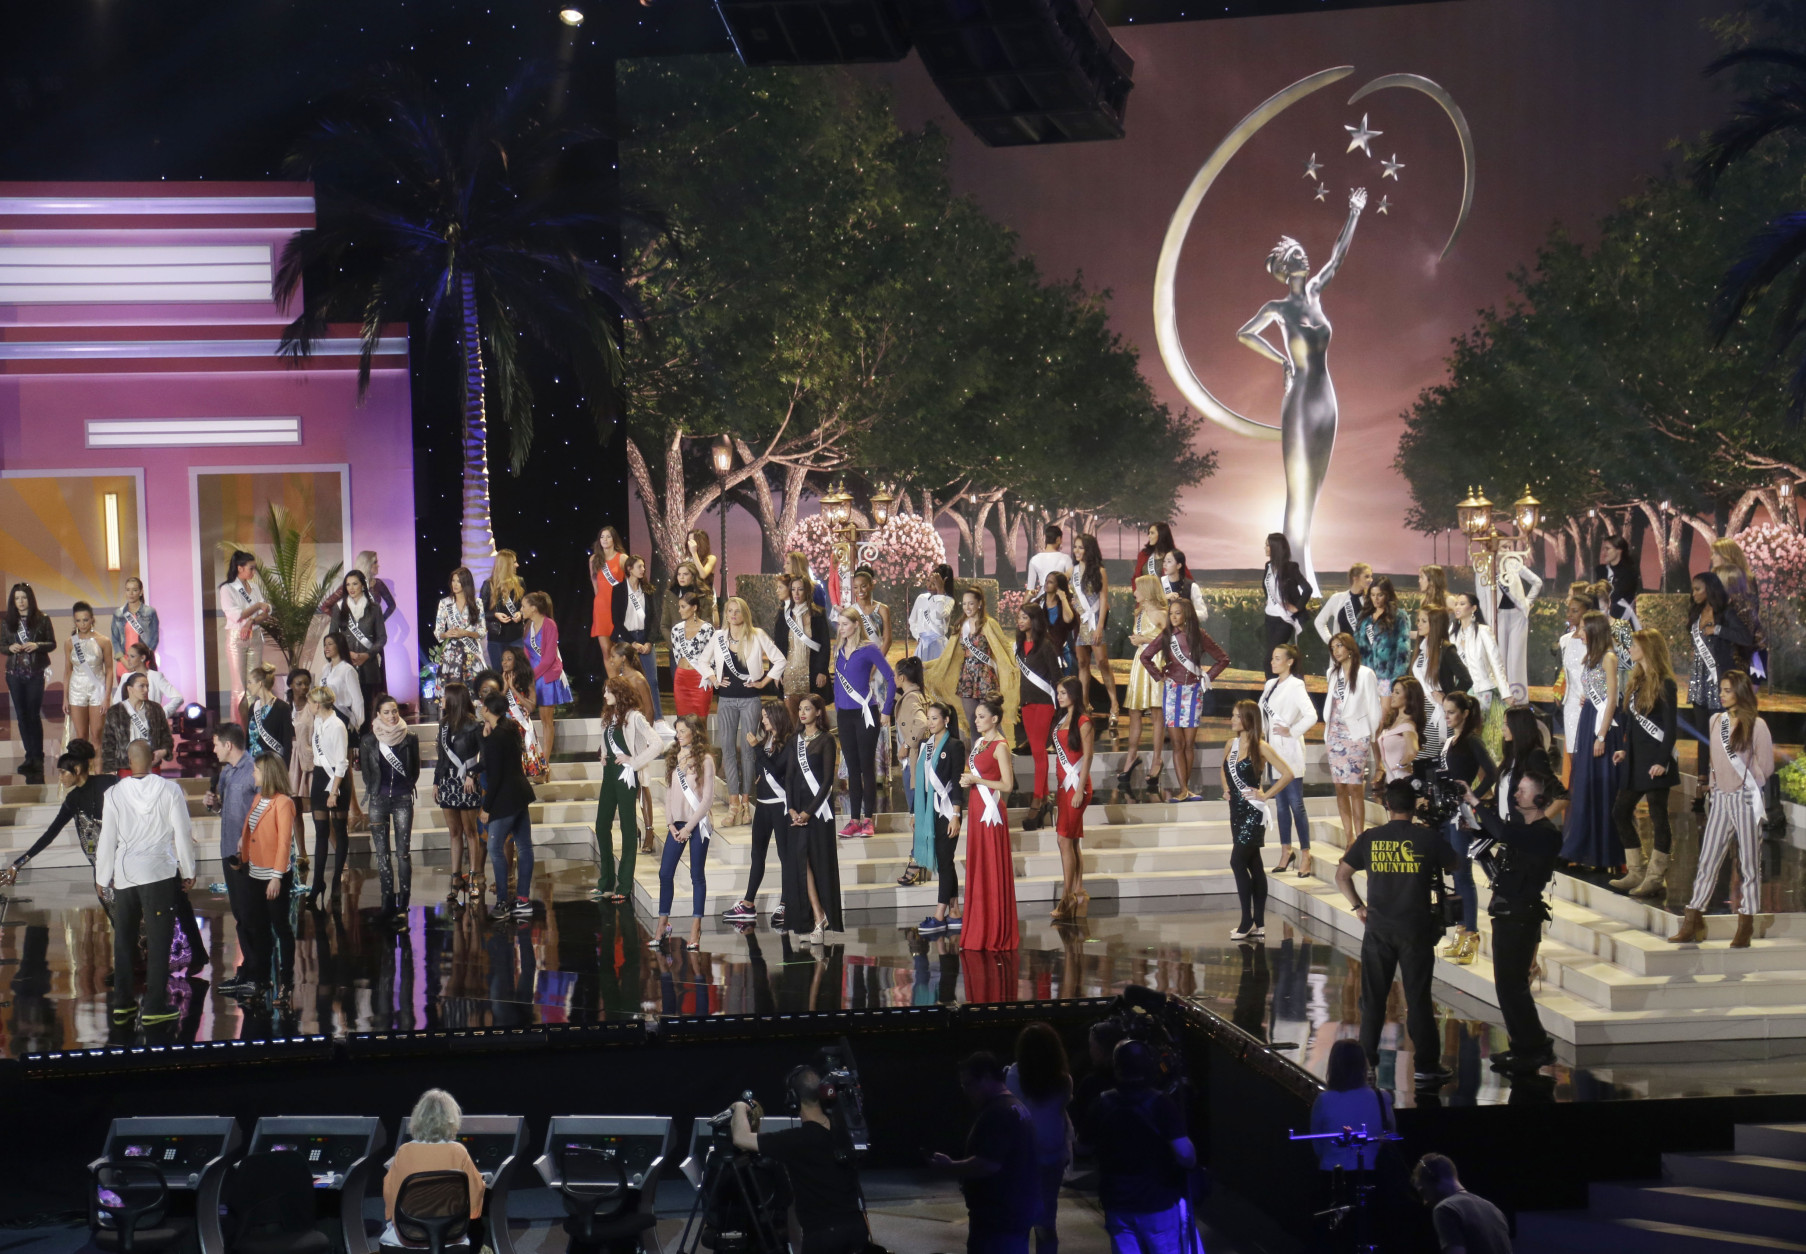 Miss Universe contestants stand in place during a break in rehearsals, Saturday, Jan. 24, 2015, at Florida International University in Miami. The Miss Universe pageant will be held Jan. 25, in Miami. (AP Photo/Wilfredo Lee)